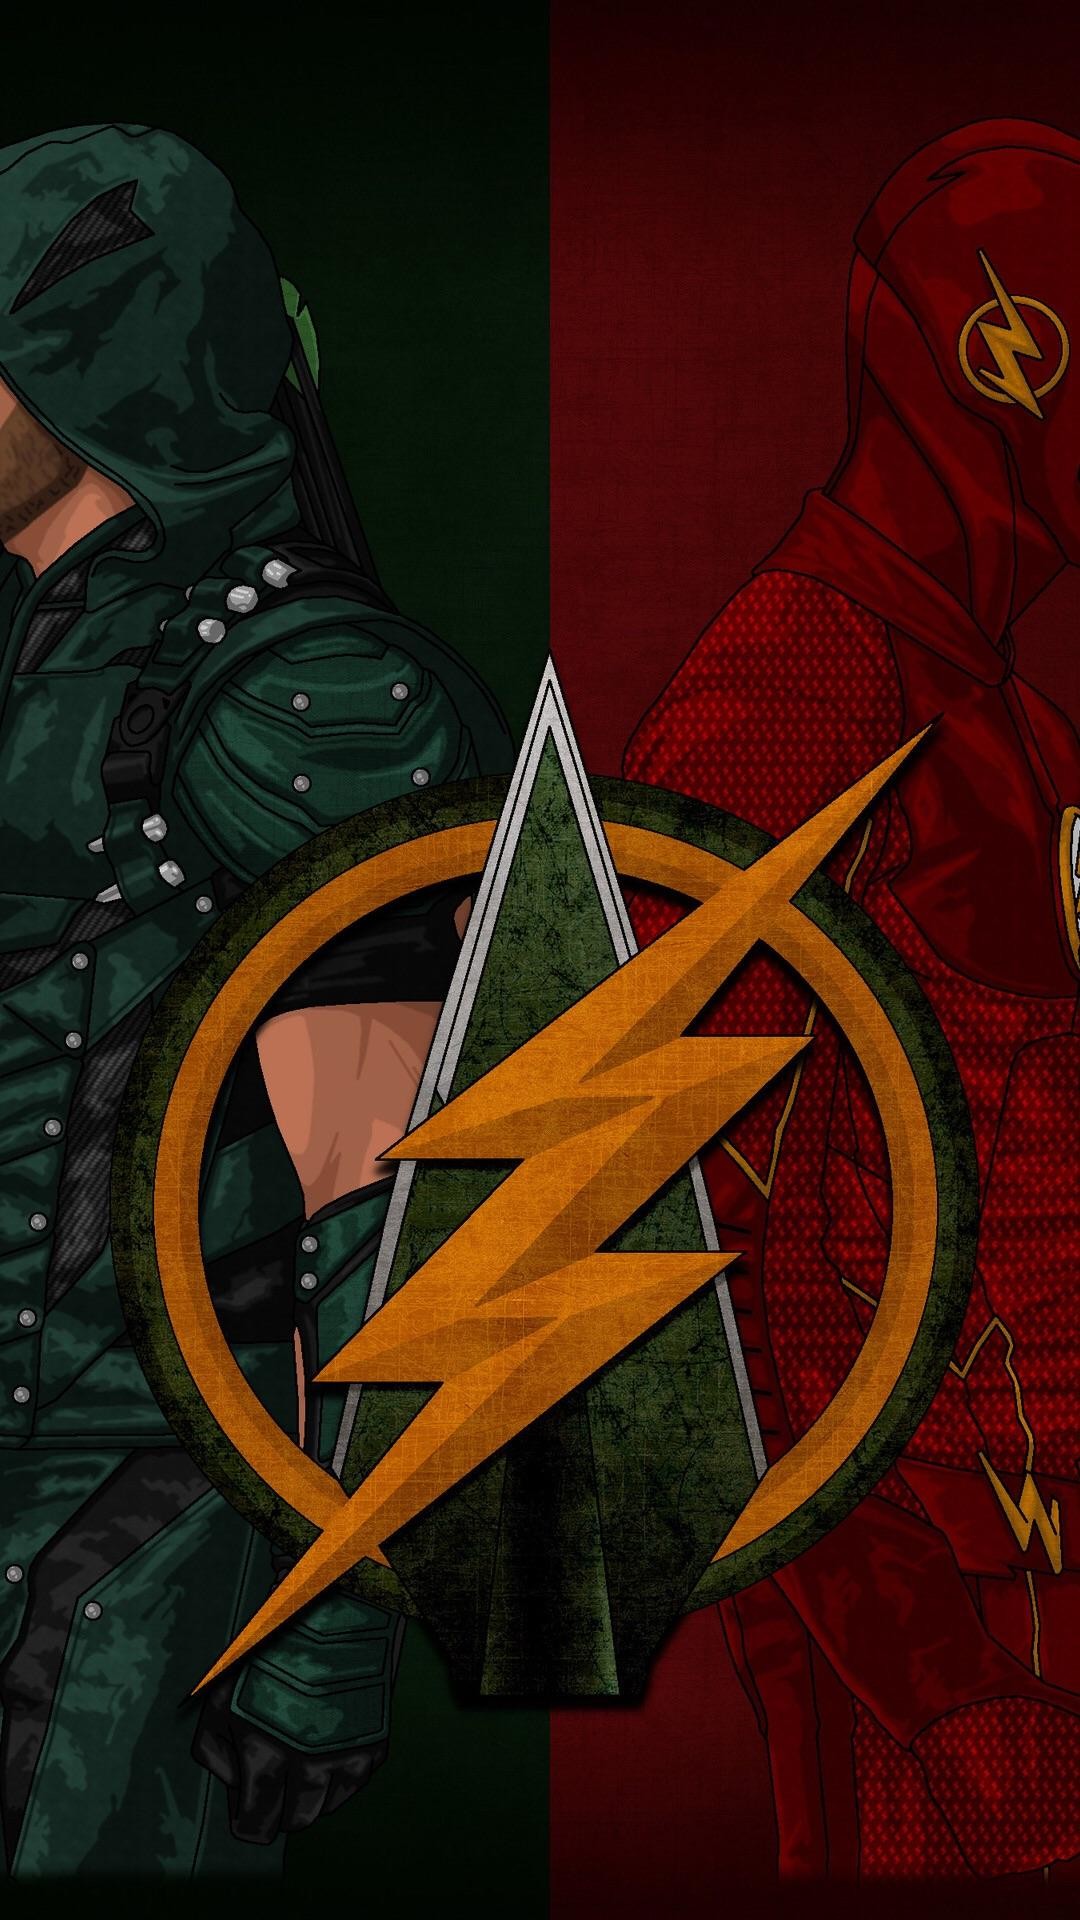 Off TopicNo Spoilers A cool Flash / Arrow phone wallpaper I found